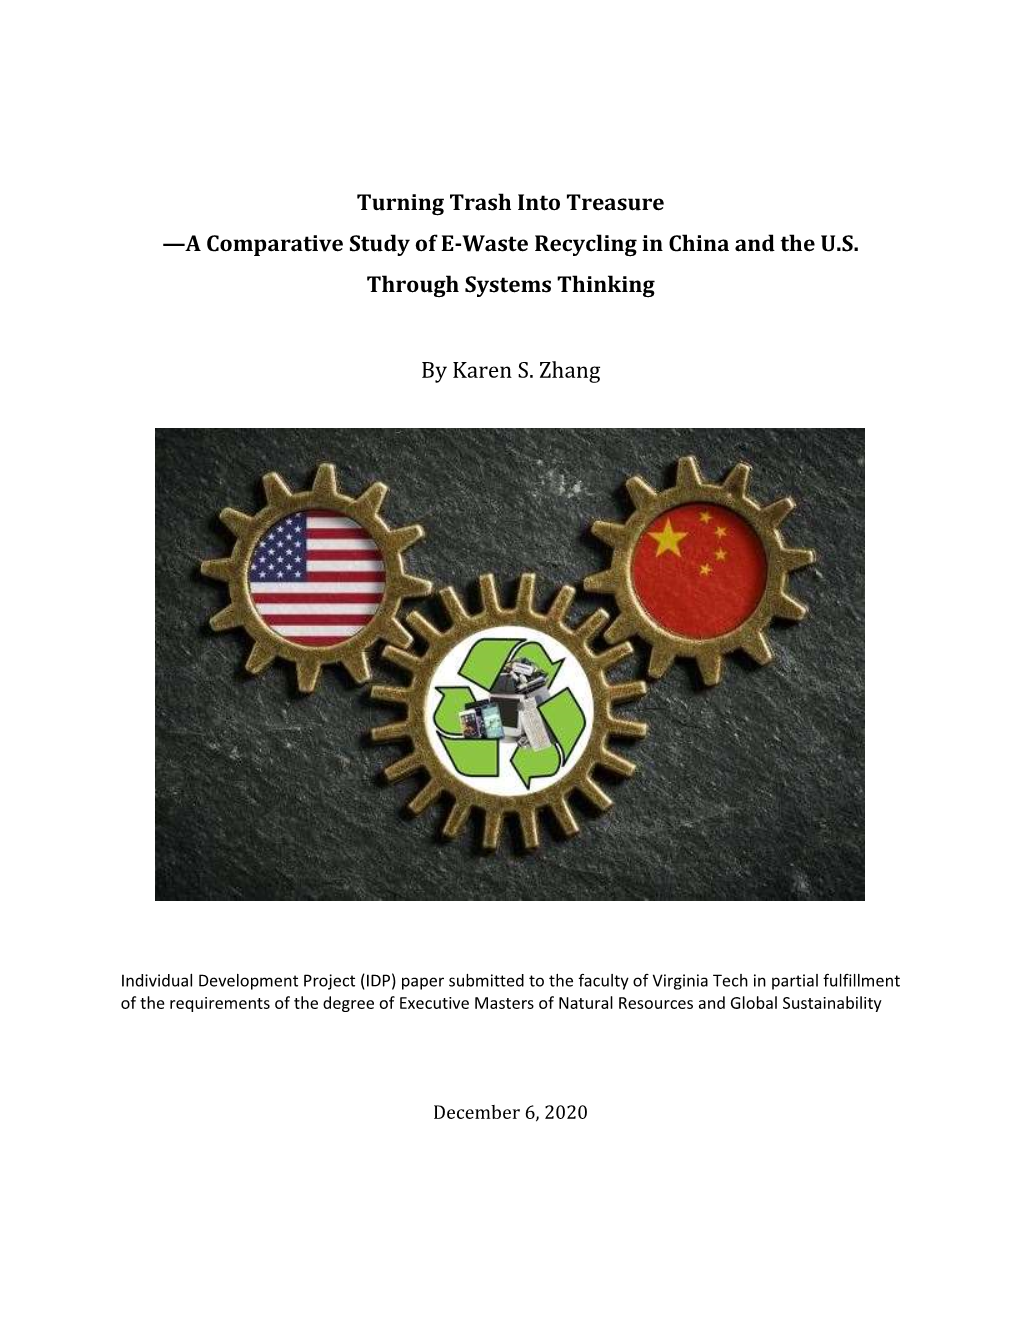 Turning Trash Into Treasure —A Comparative Study of E-Waste Recycling in China and the U.S